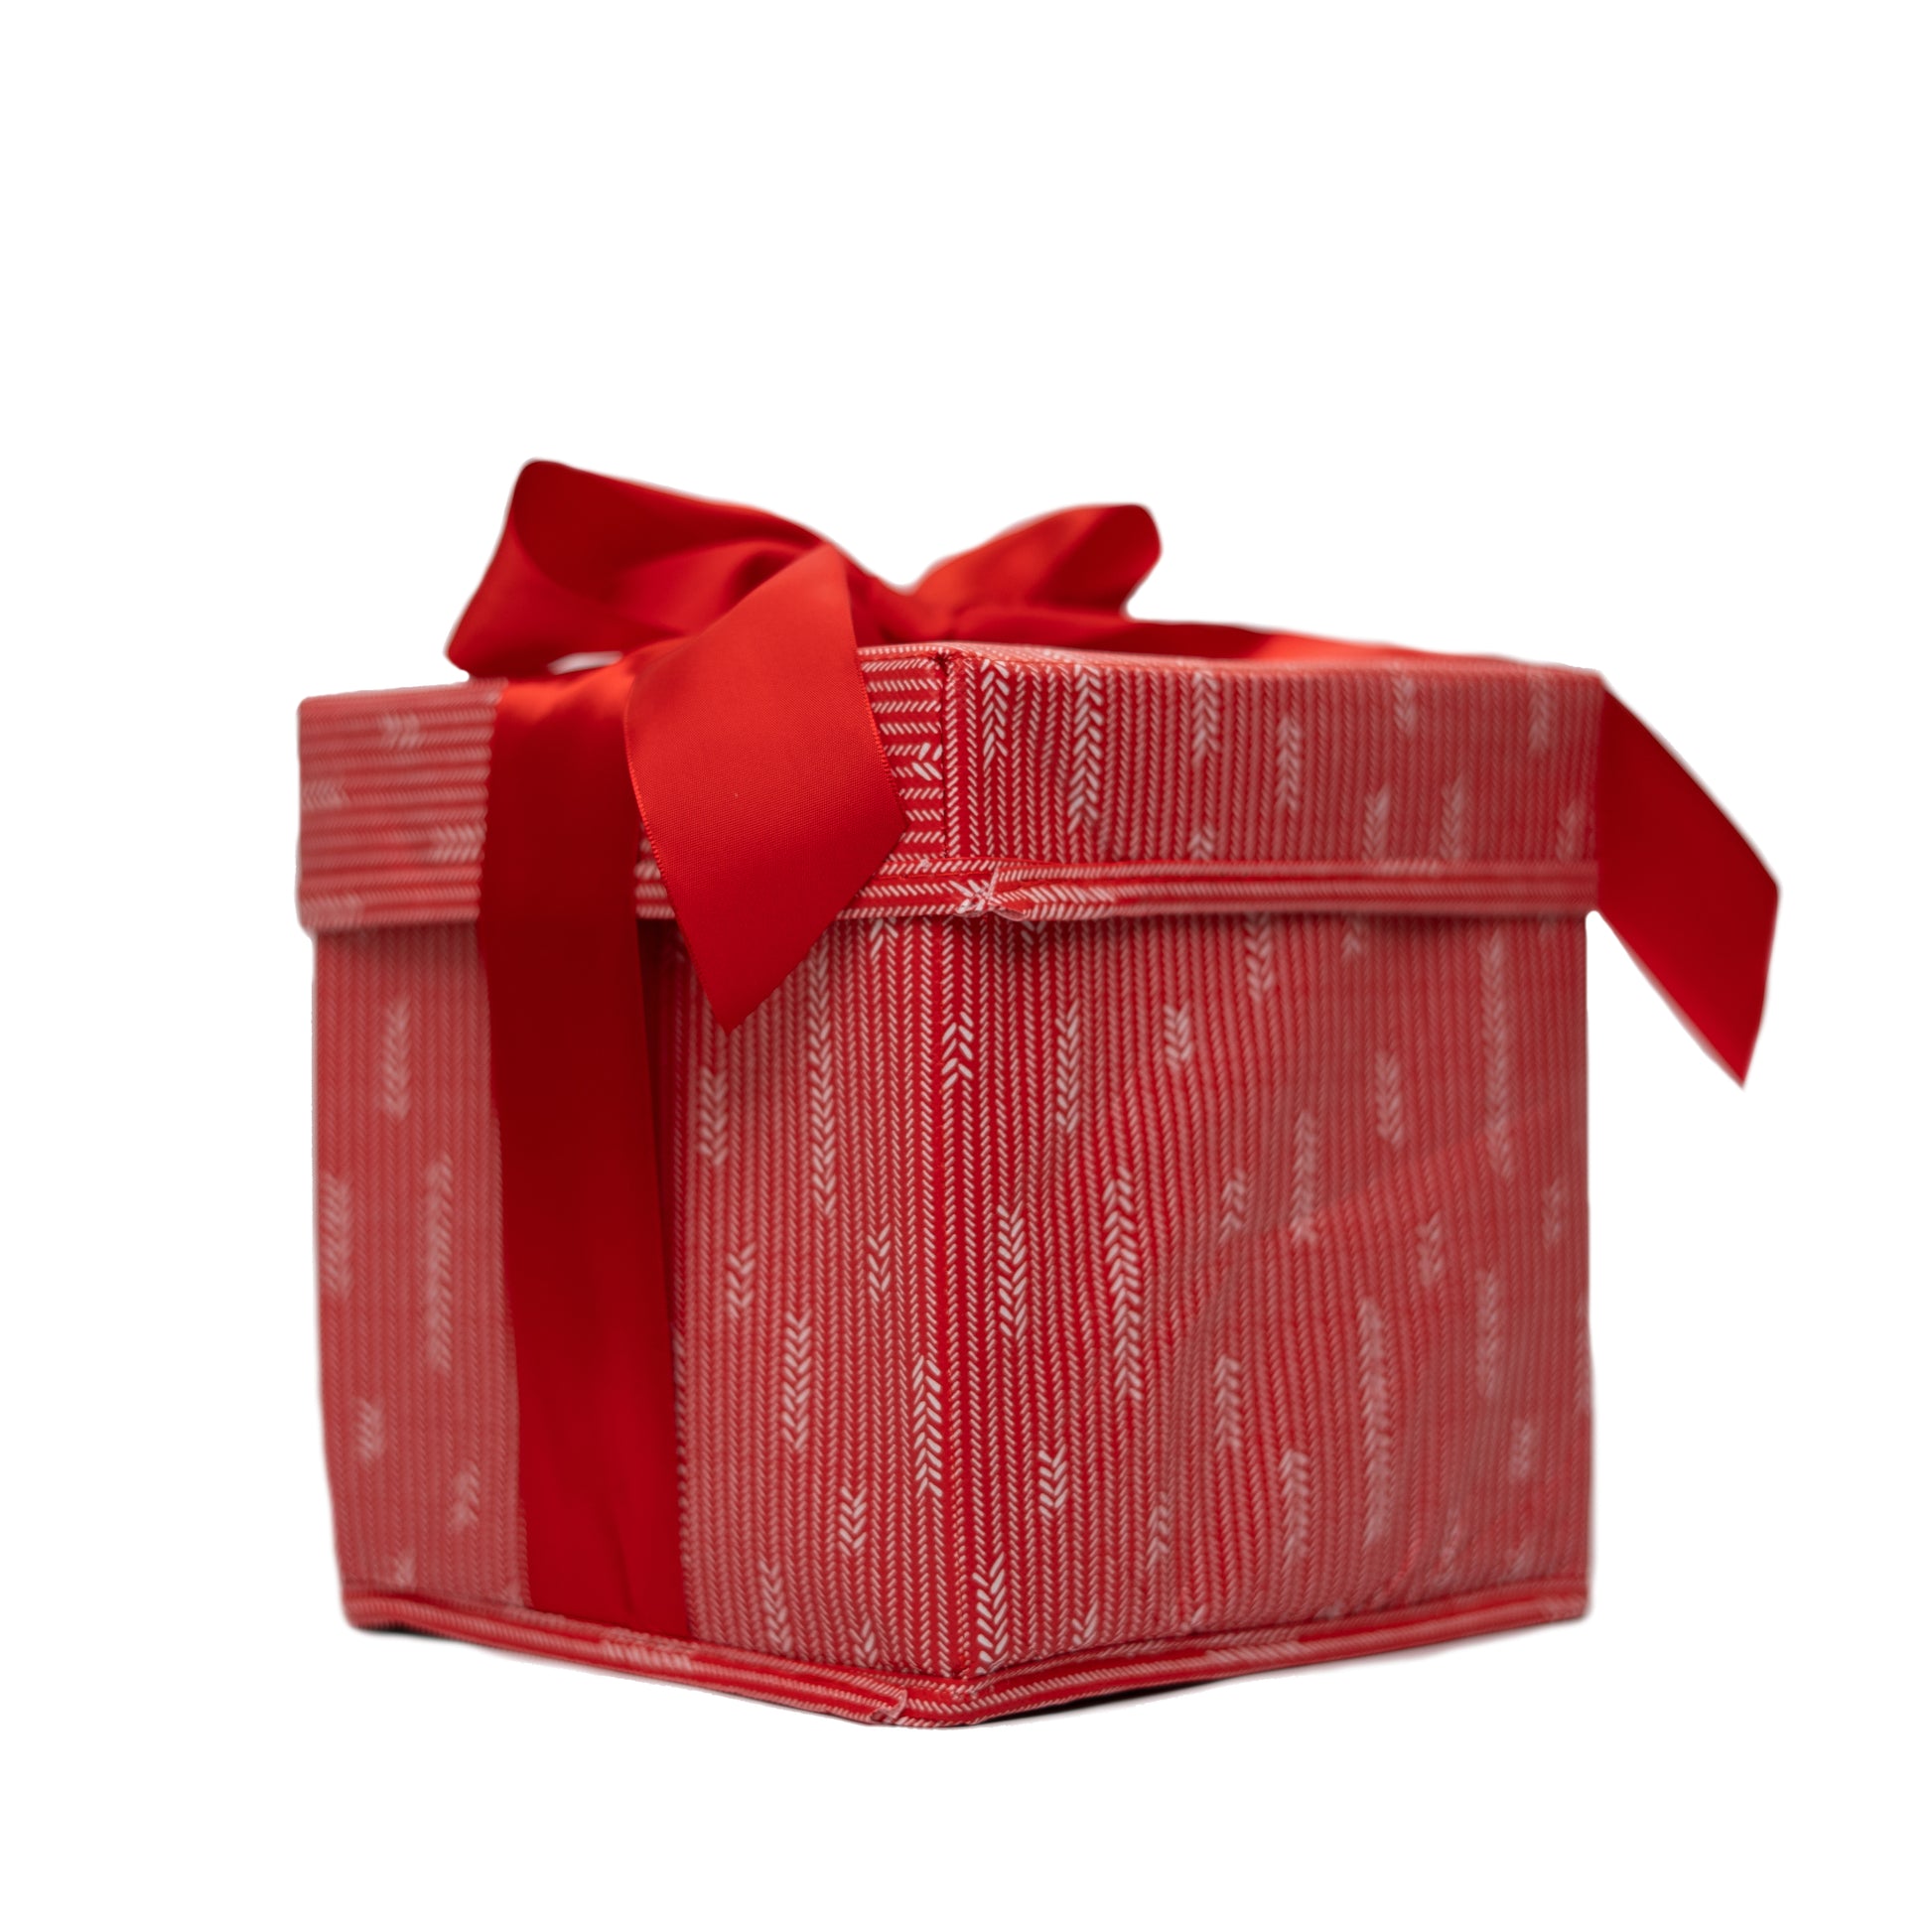 Gift Ribbons - Satin, Grosgrain, and Christmas Designs - Box and Wrap